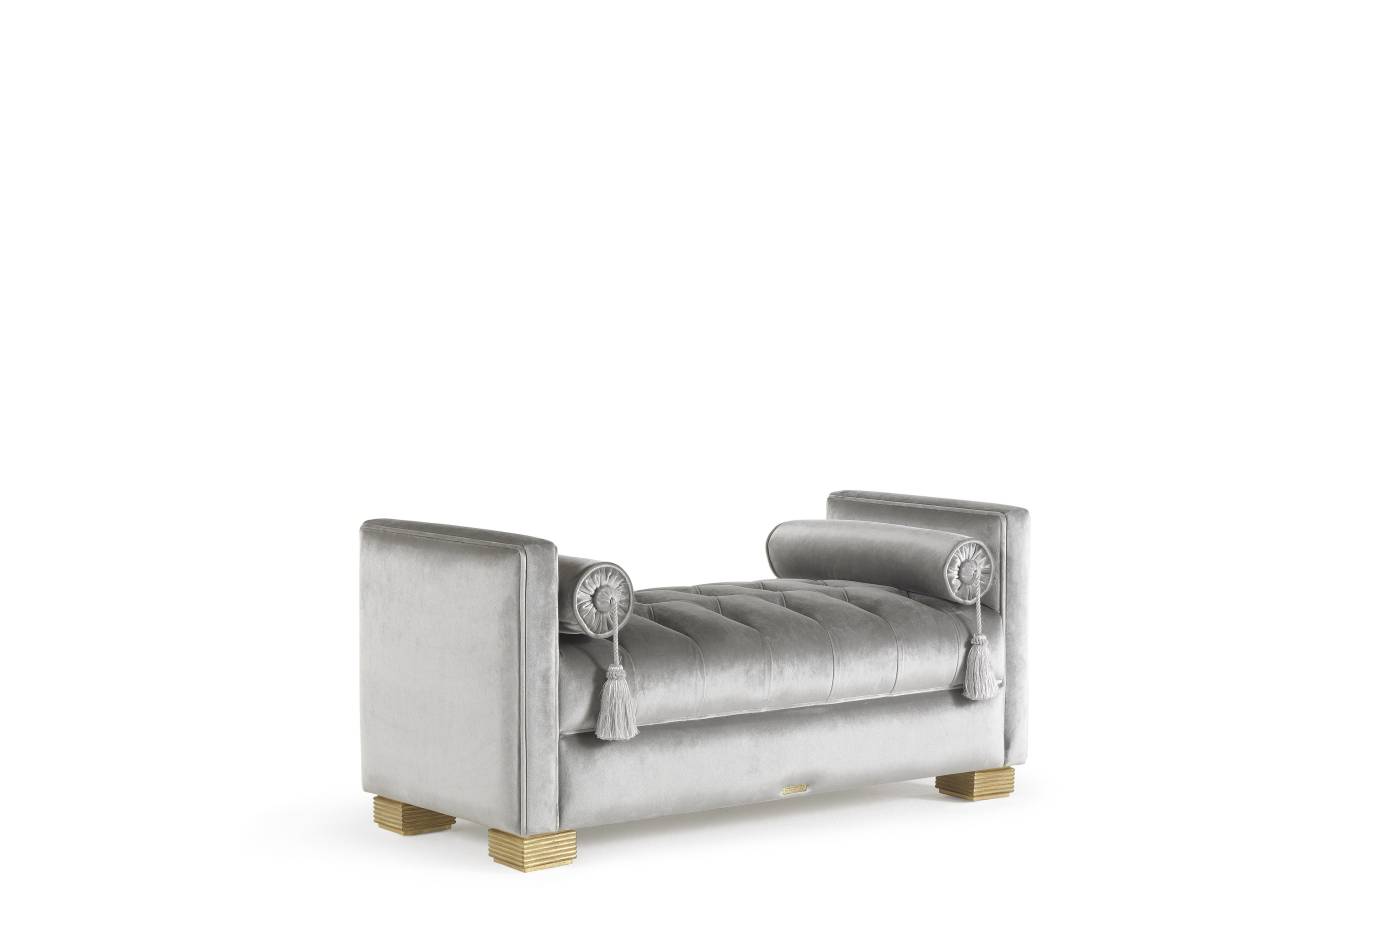 BURTON bench - Bespoke projects with luxury Made in Italy classic furniture